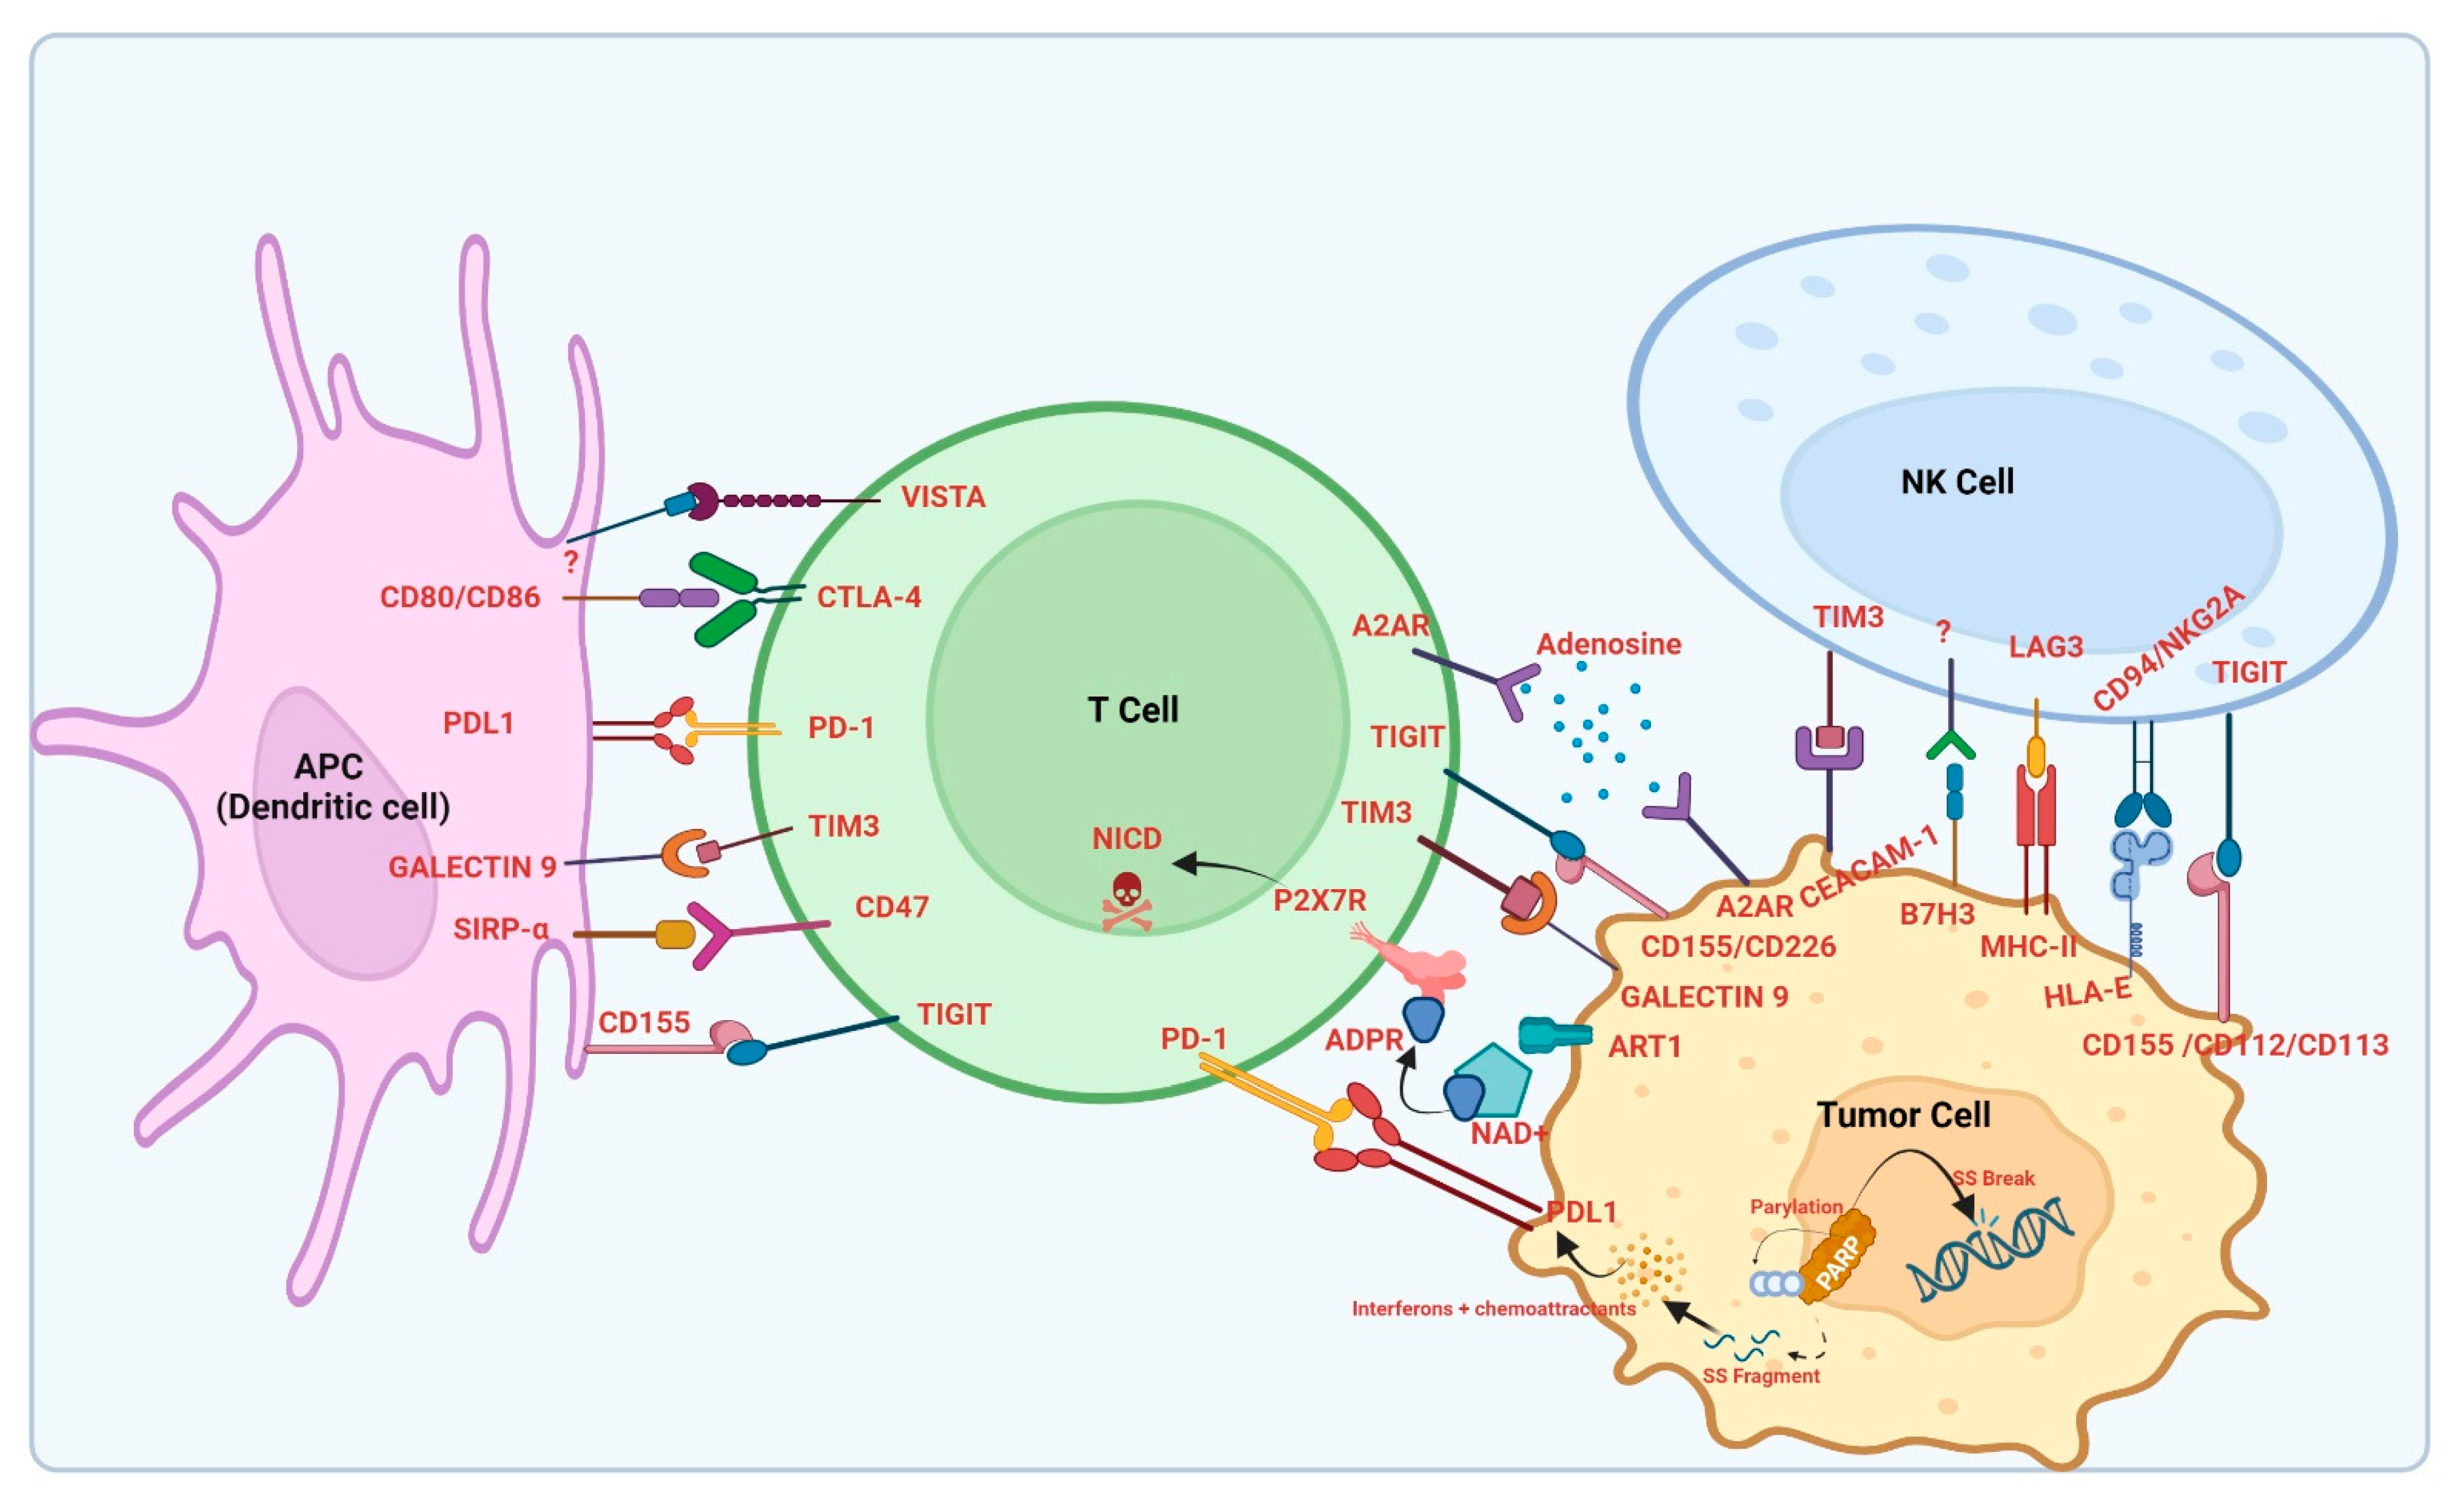 Translational Control of Immune Evasion in Cancer: Trends in Cancer